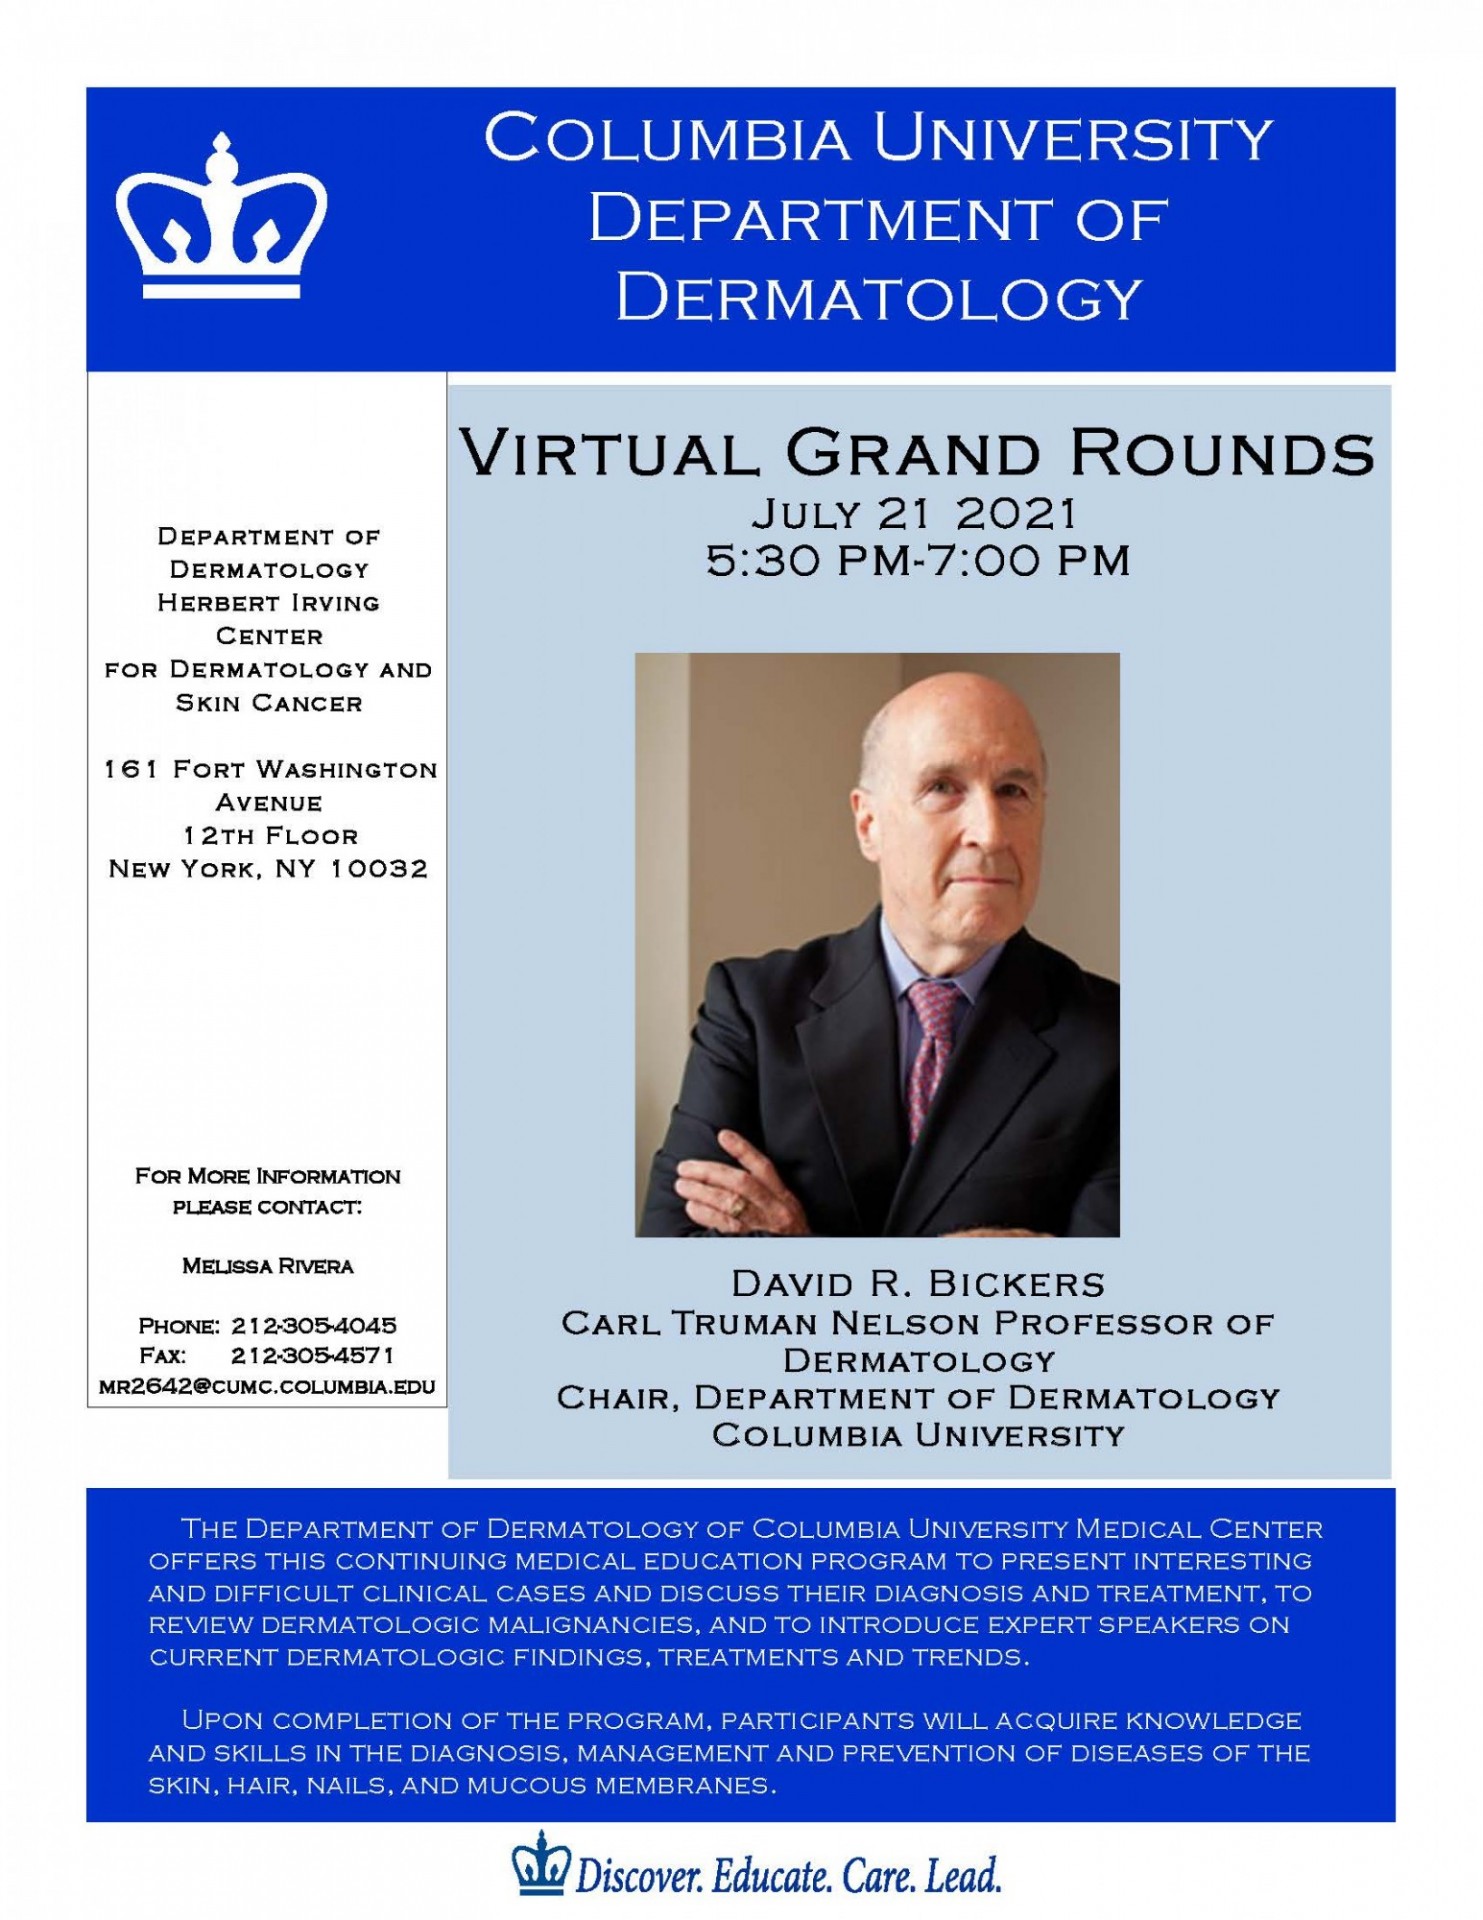 Dermatology - Research Grand Rounds 